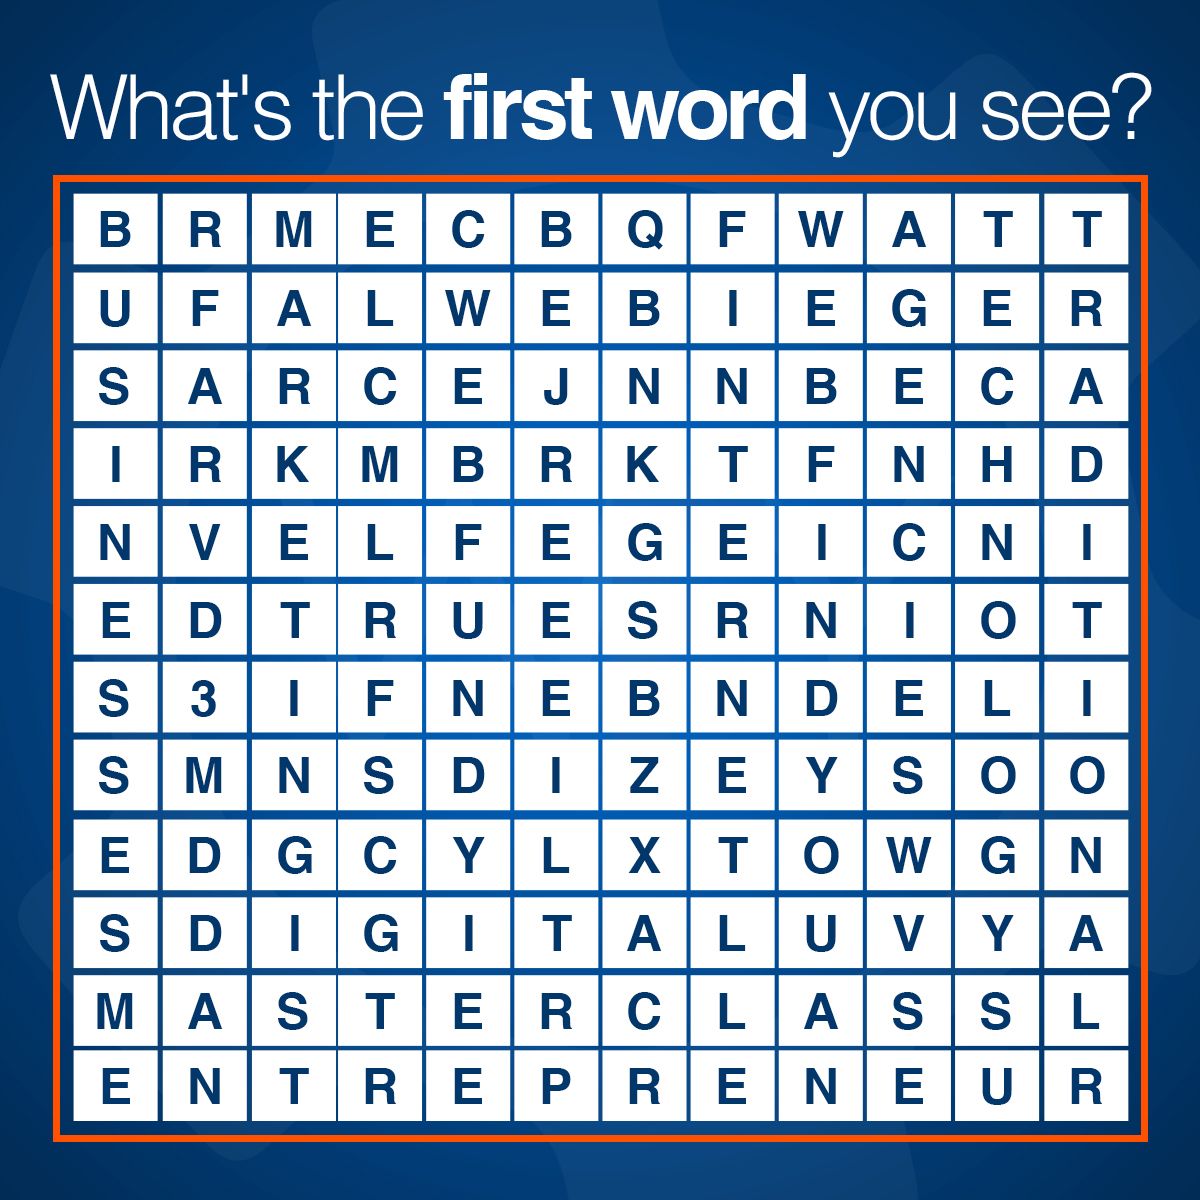 What's the first word you see?